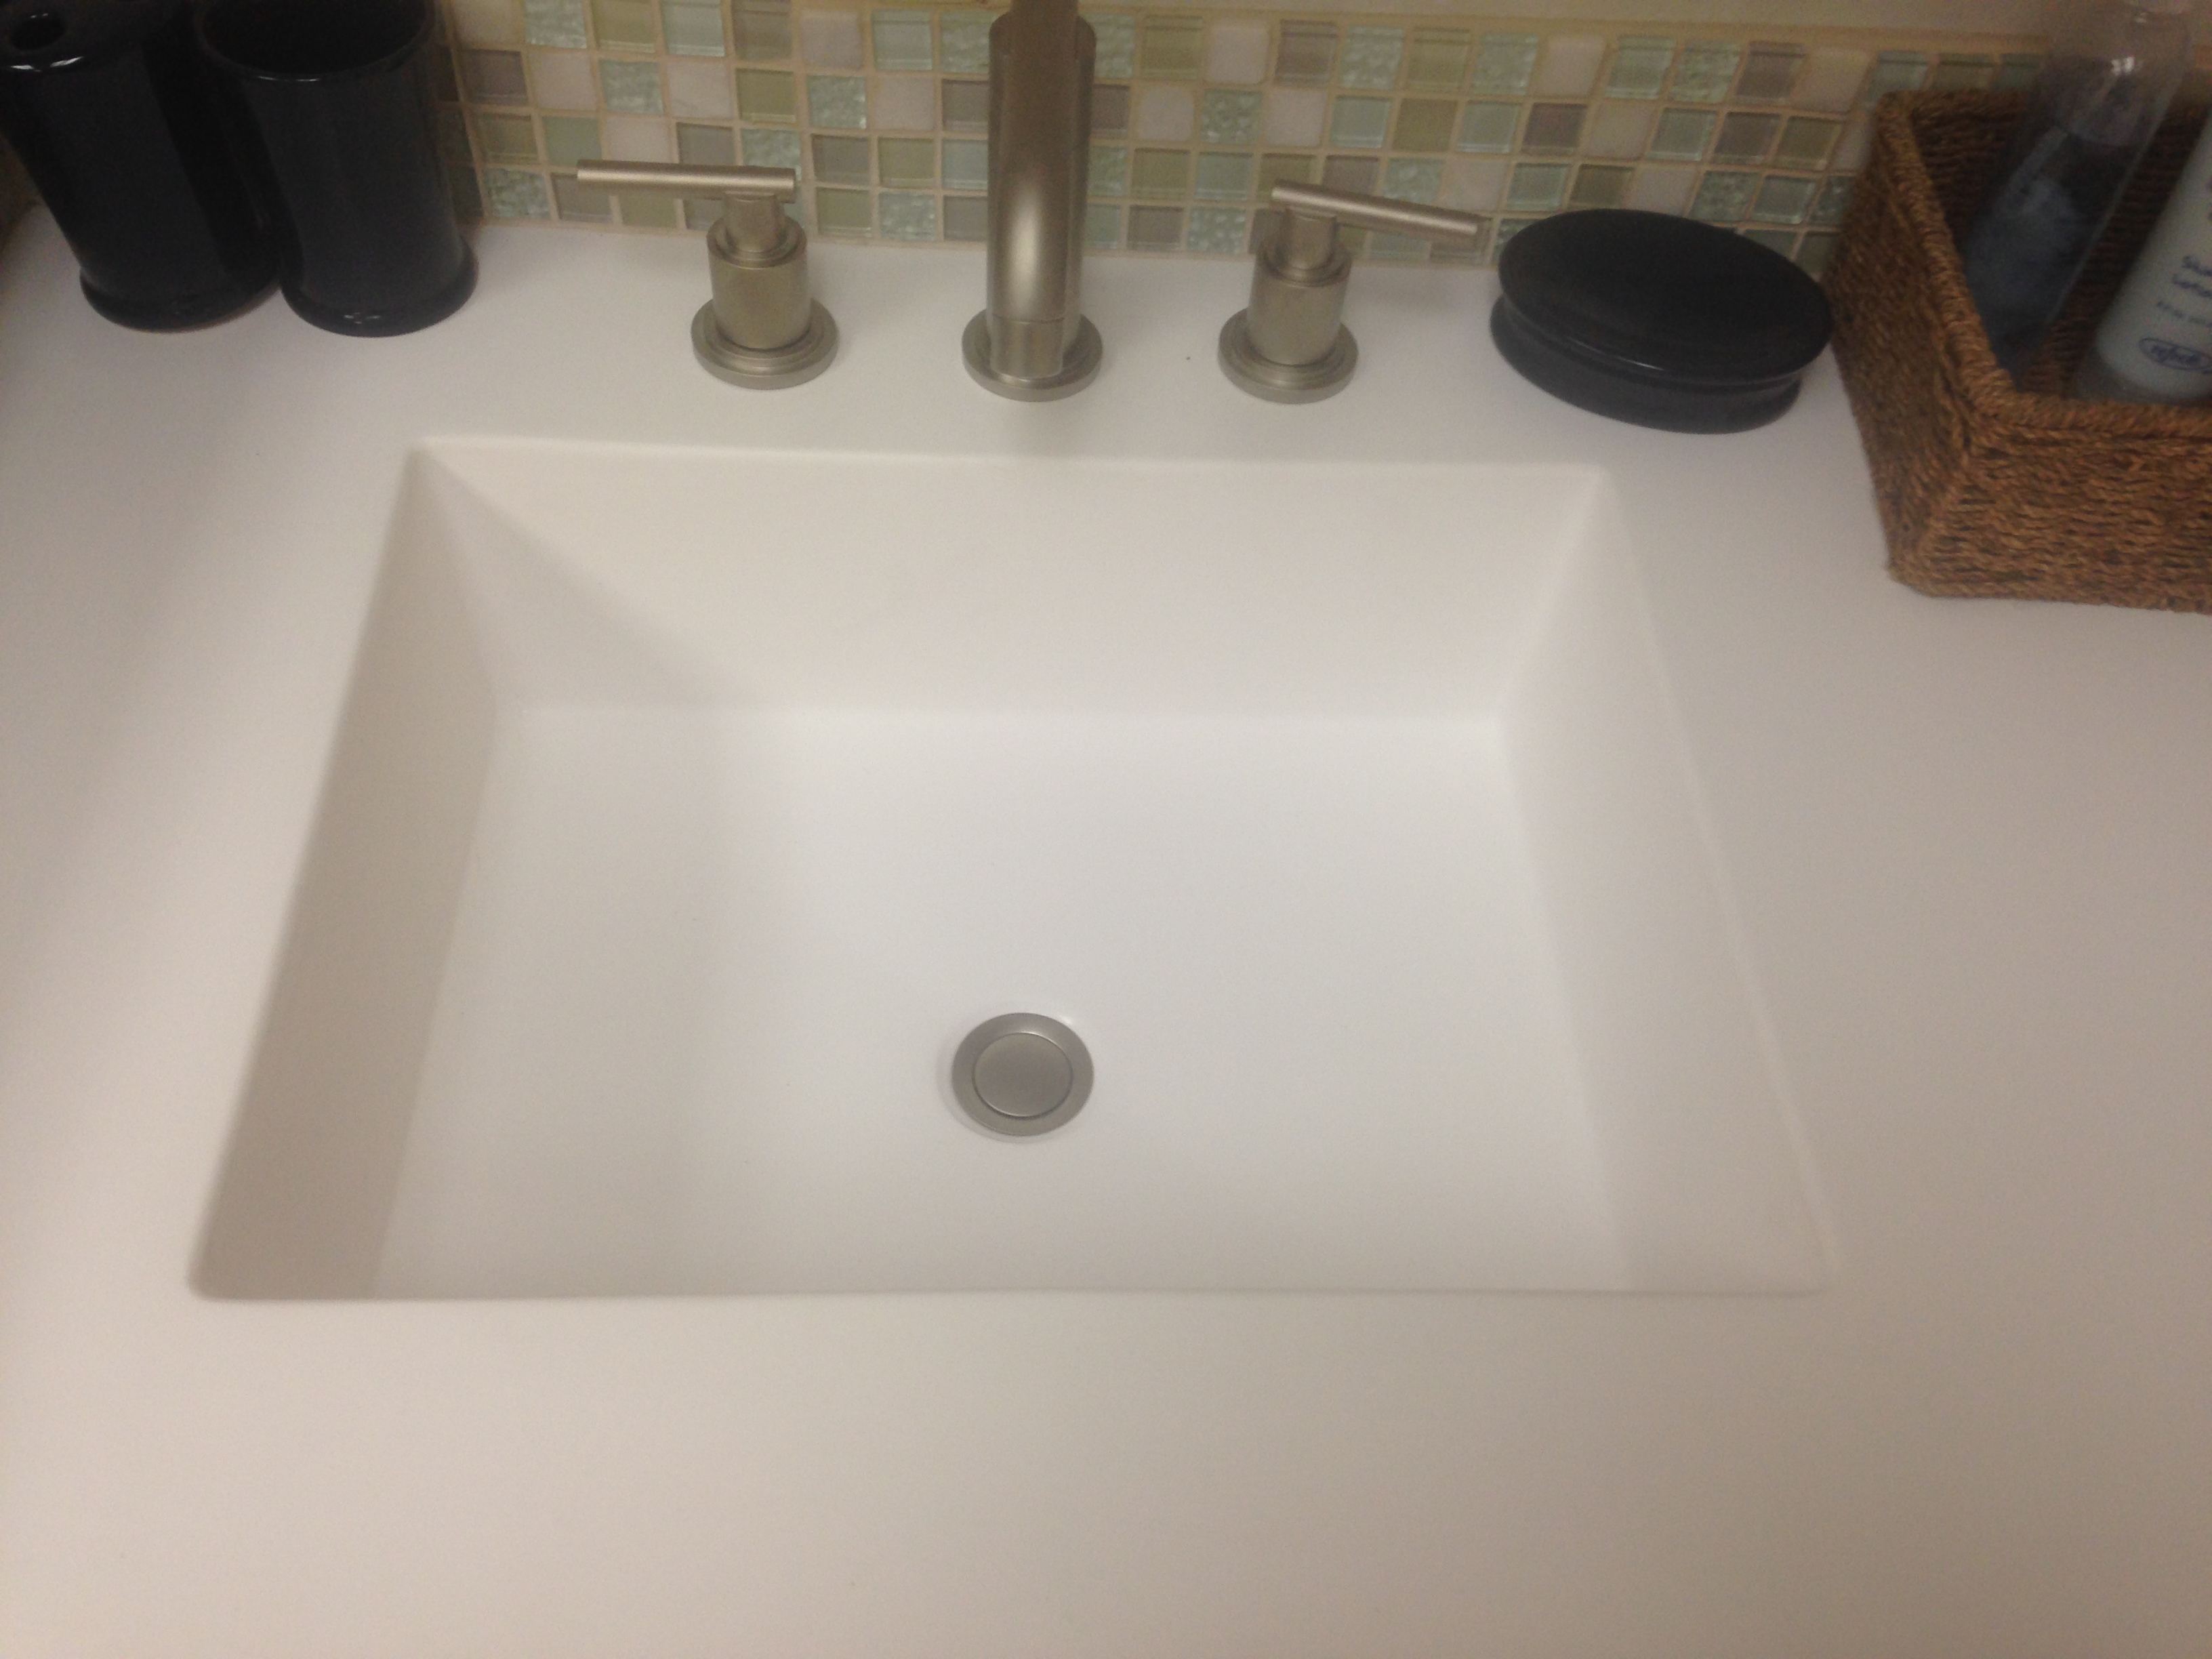 Seamless Cultured Marble Countertop With Rectangular Sink